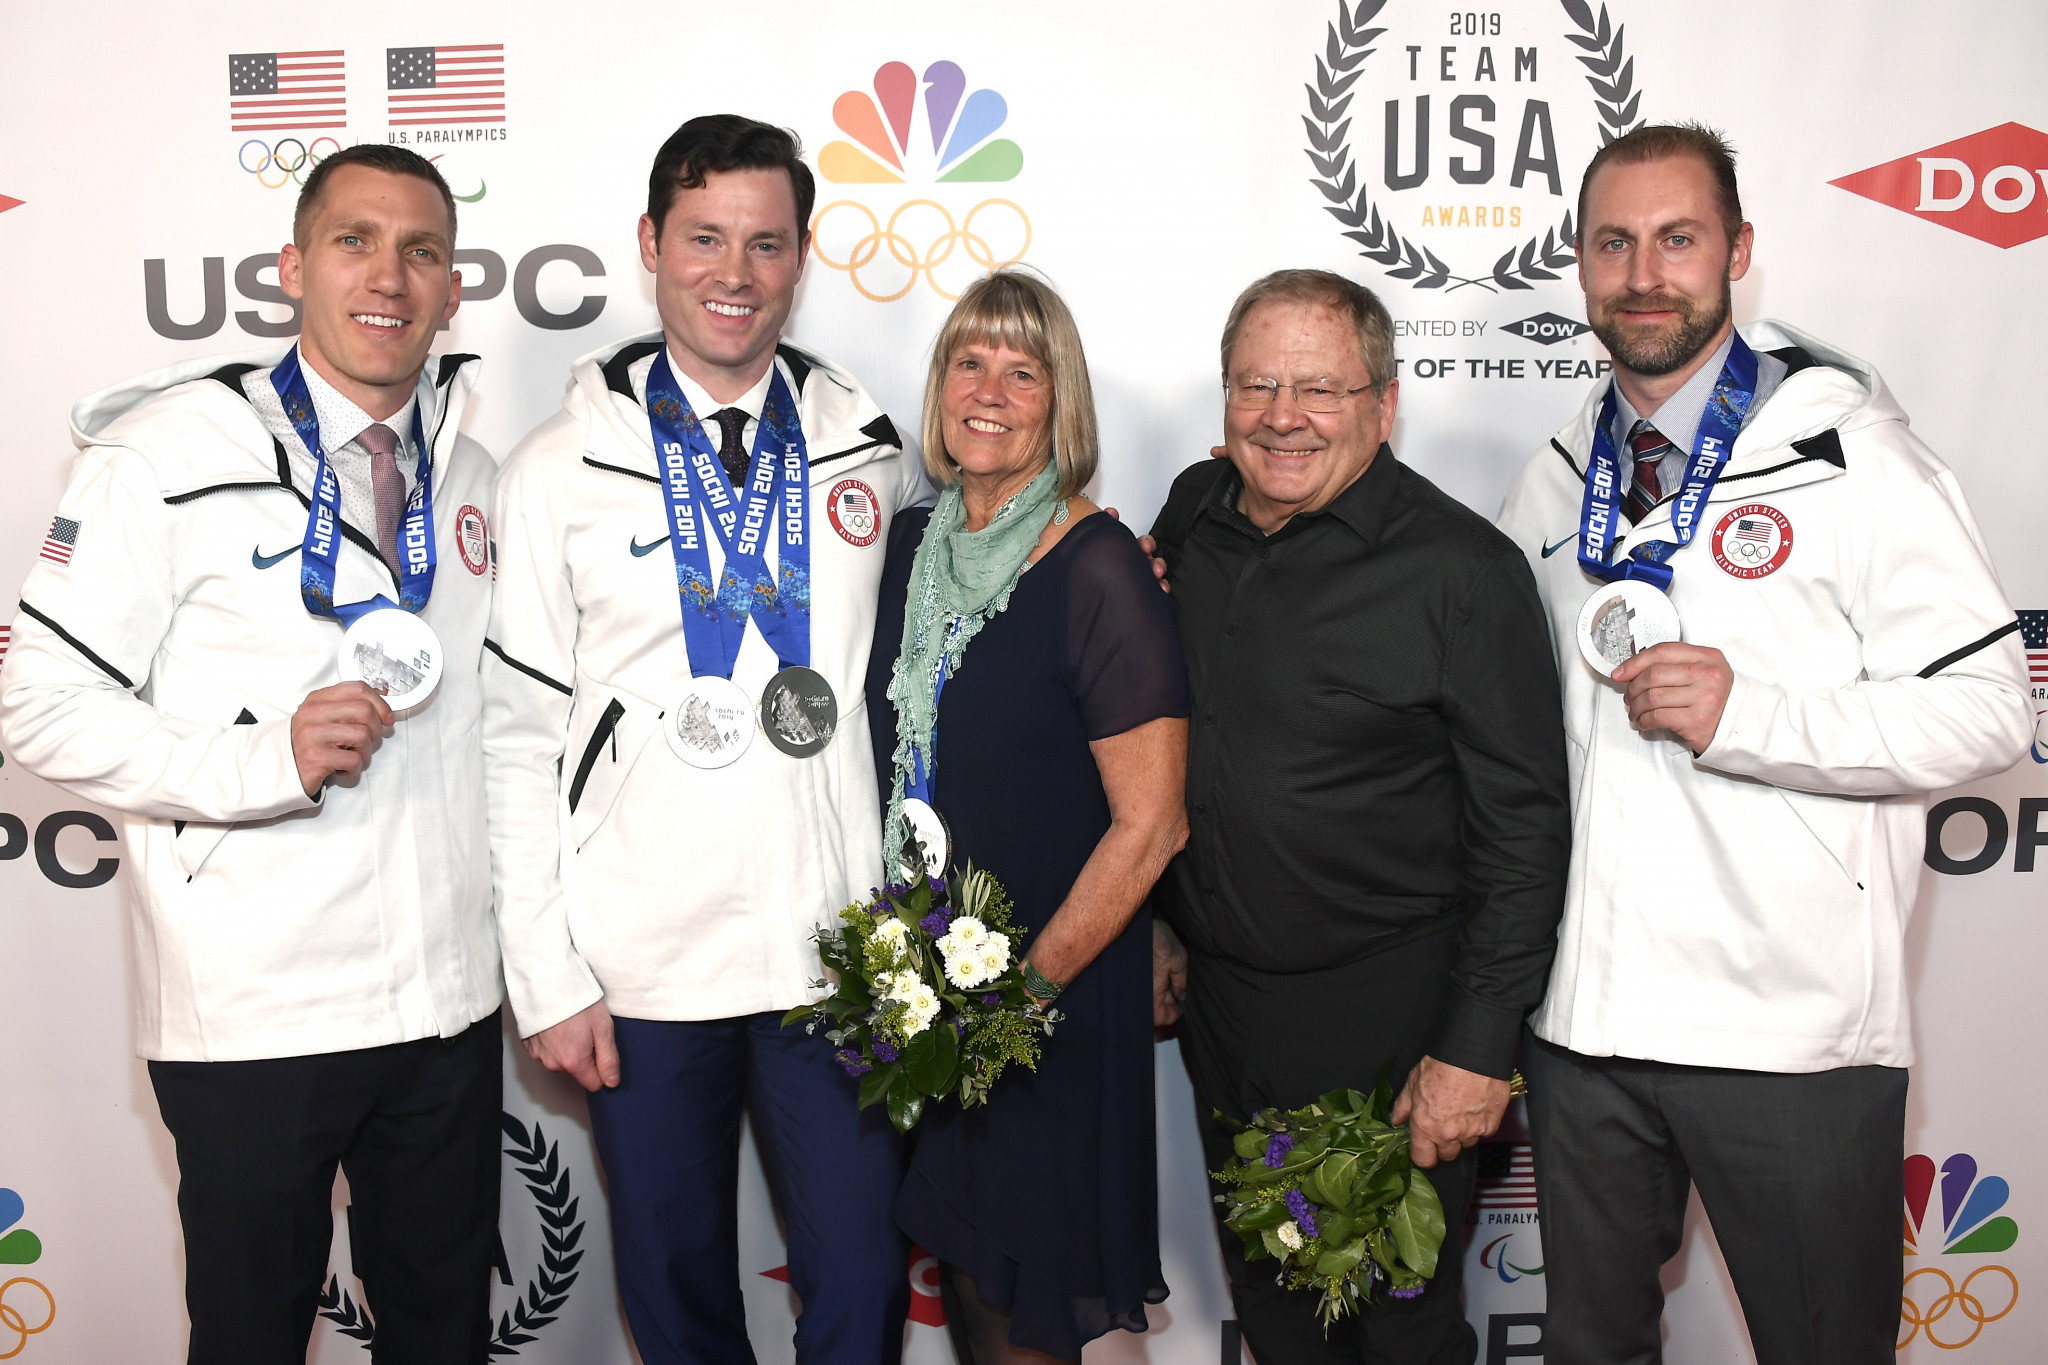 Family of late Steven Holcomb receive Olympic bobsleigh silver medals at Team USA awards